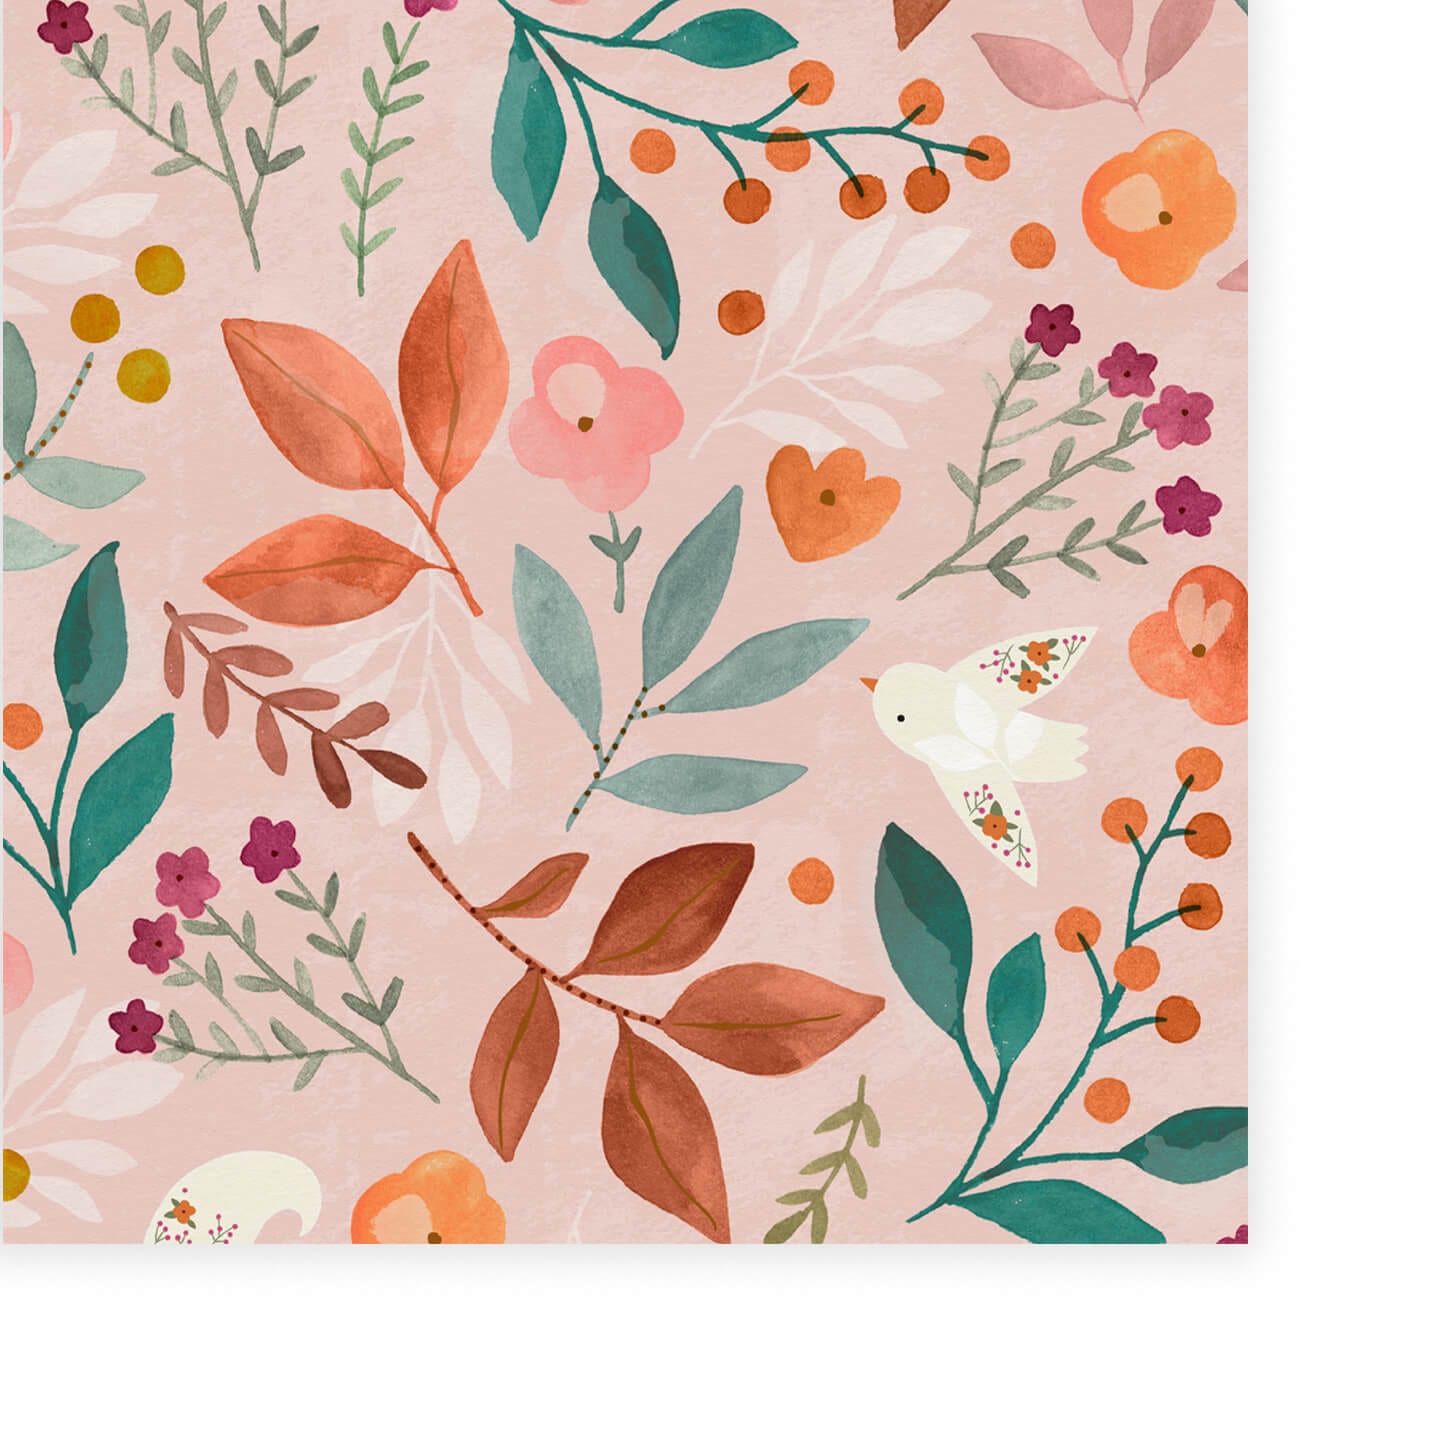 Wallpaper of vintage pink background with cream birds and squirrels with floral detailing. vintage pink and orange flowers with green leaves.